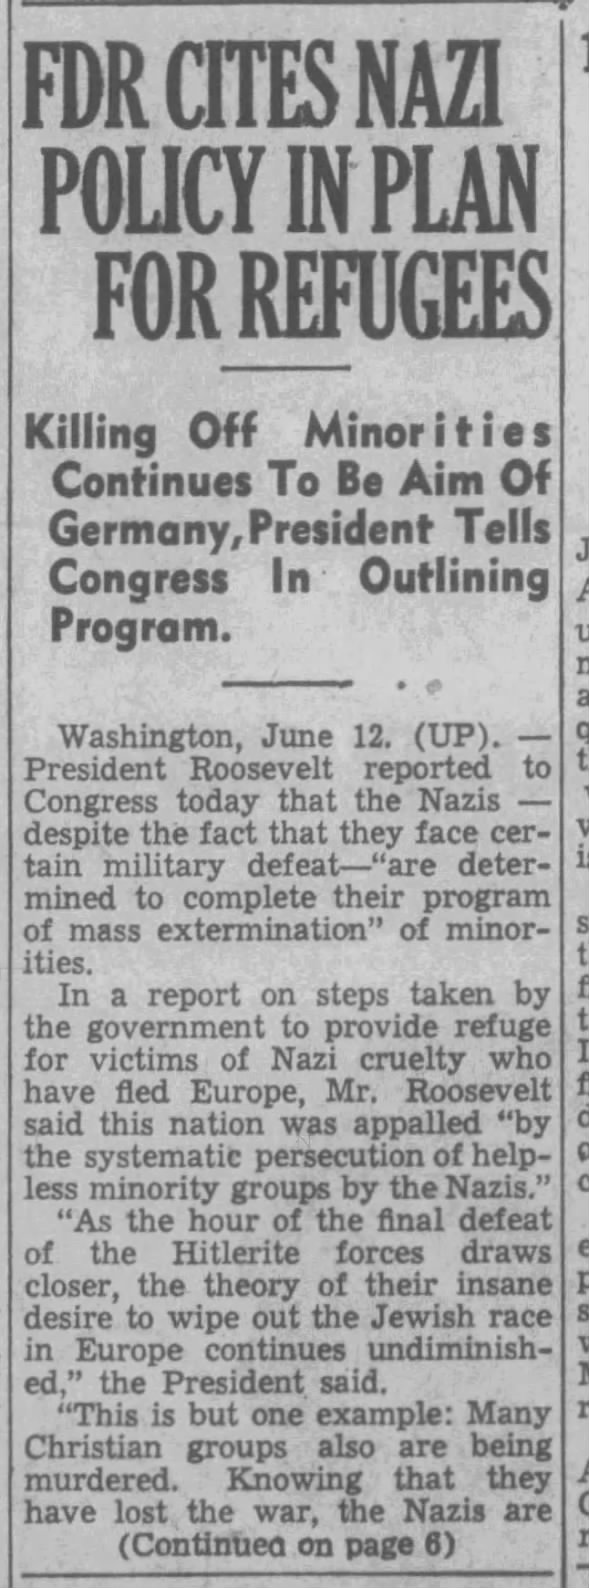 FDR CITES NAZI POLICY IN PLAN FOR REFUGEES